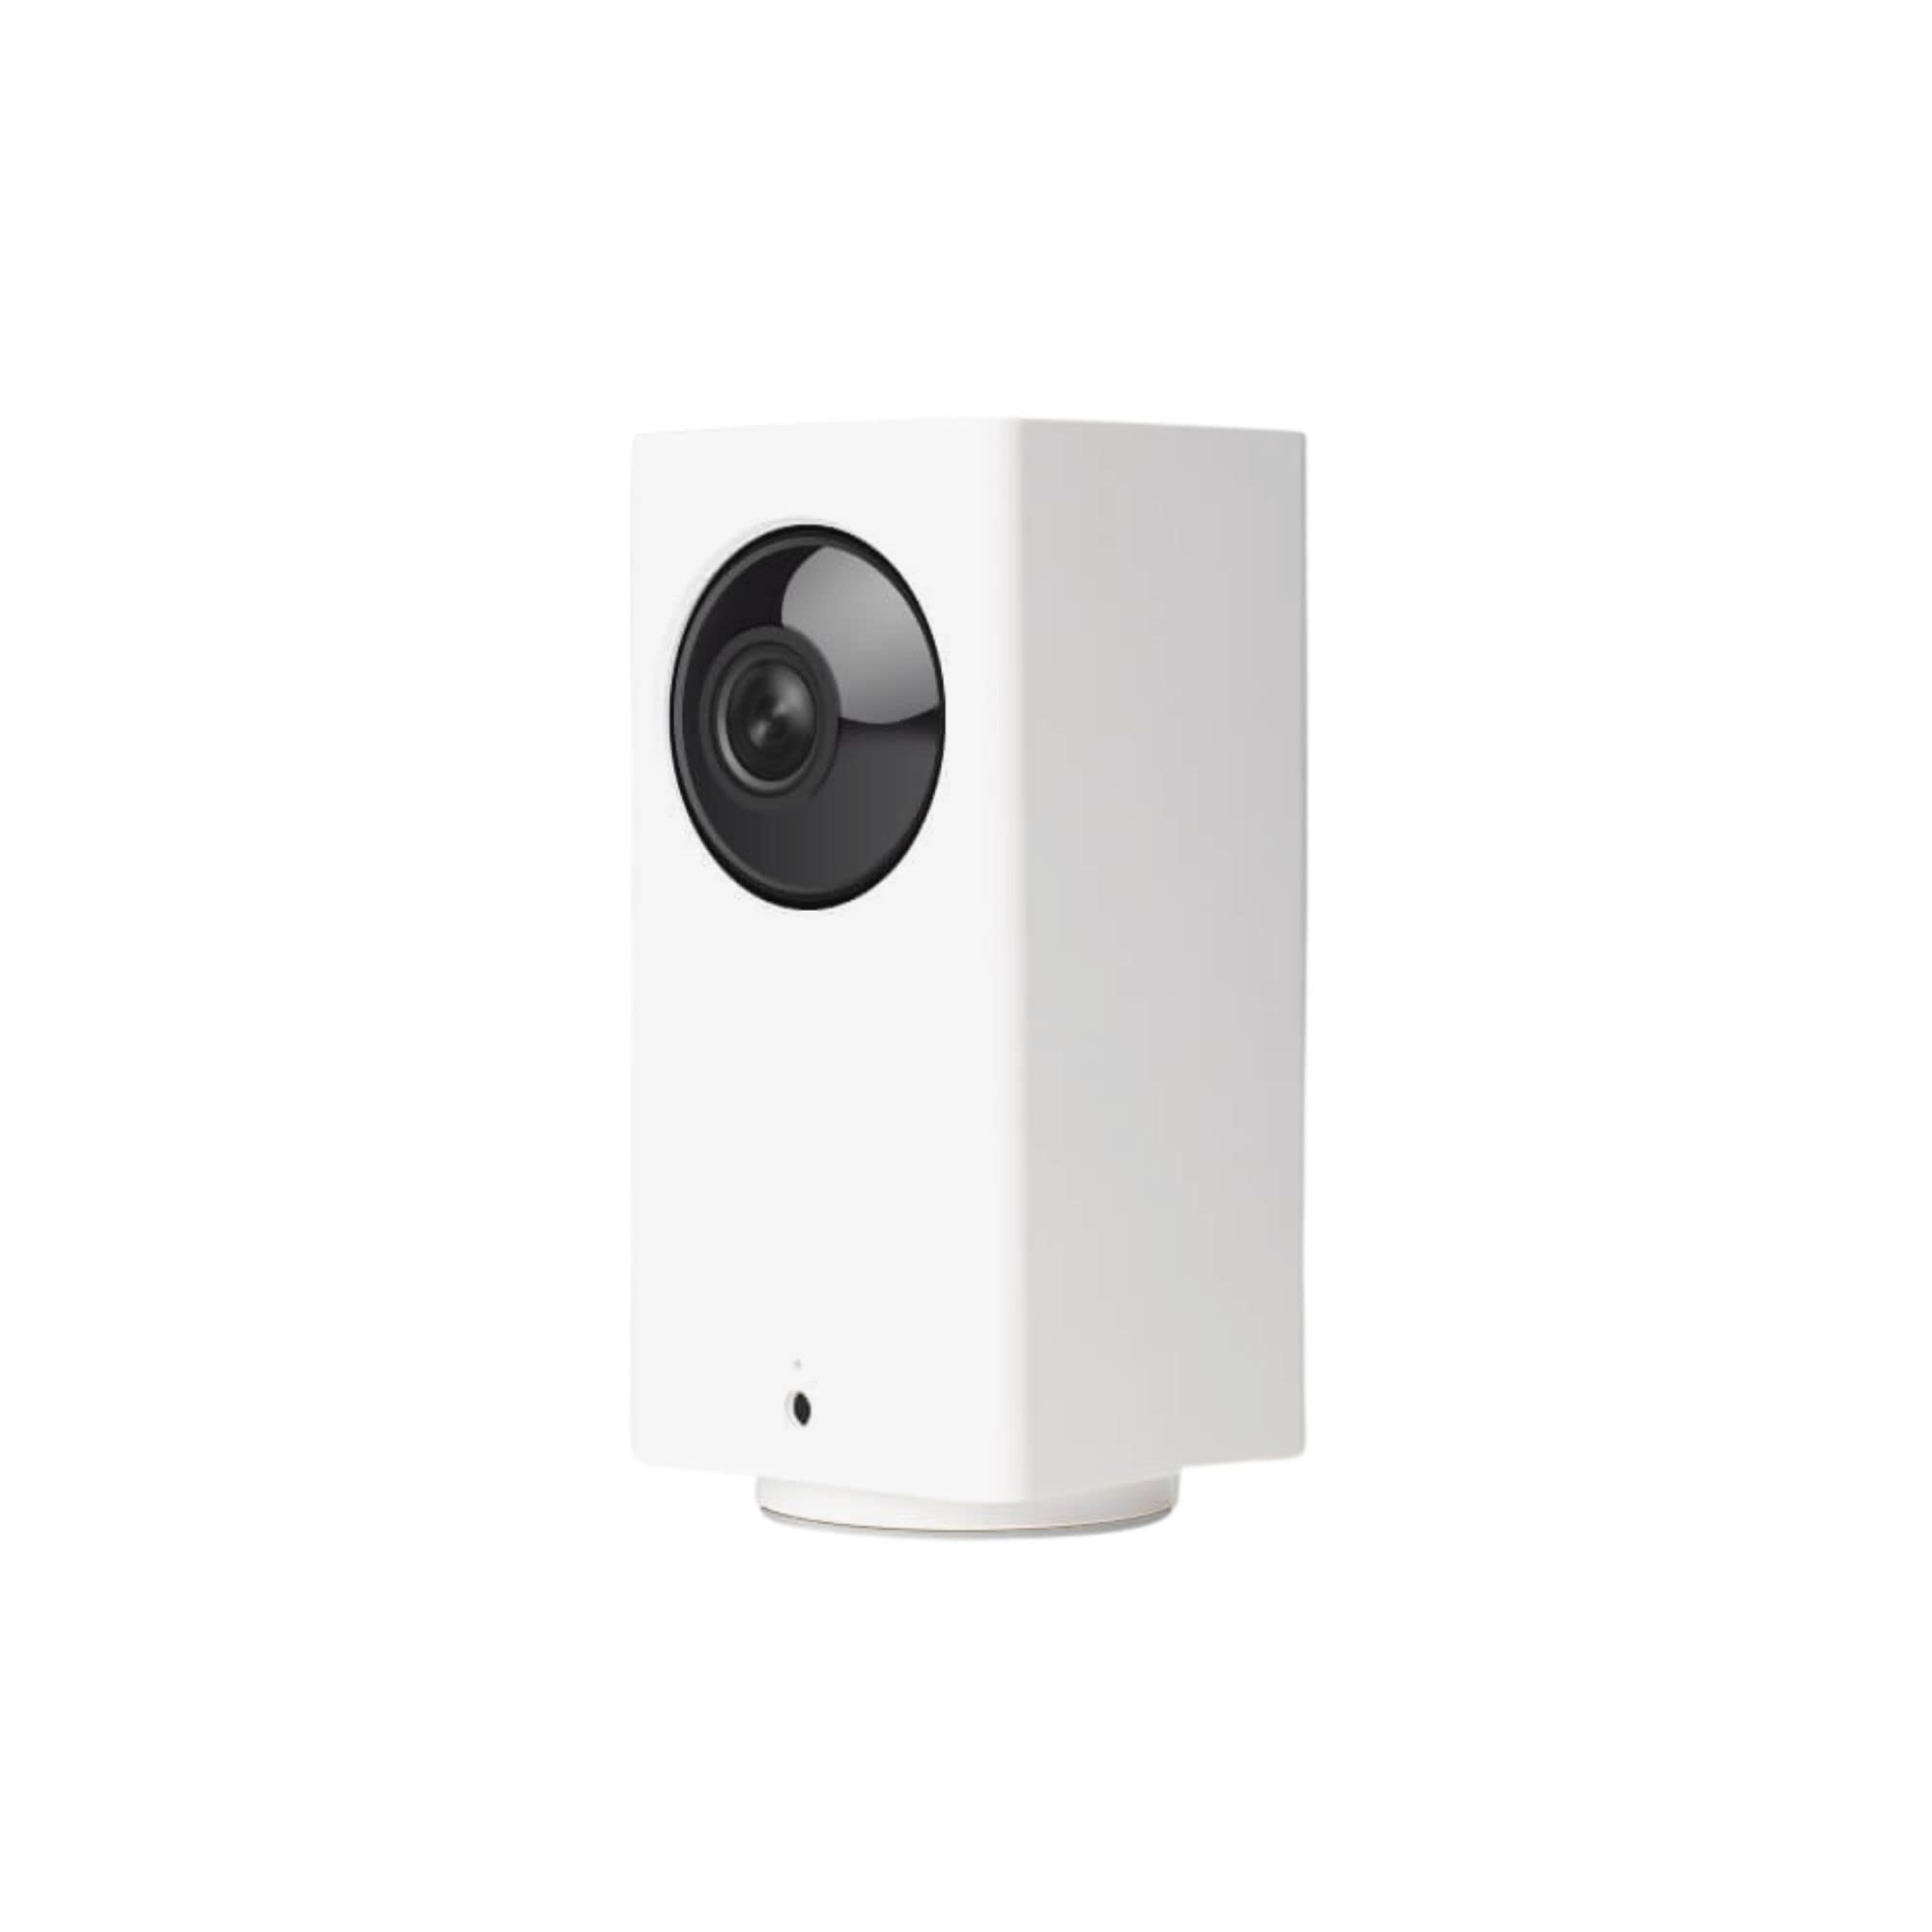 Wyze Cam 1080p Pan/Tilt/Zoom Wi-Fi Indoor Smart Home Camera with Night Vision, 2-Way Audio, Works with Alexa & the Google Assistant, White - WYZECP1